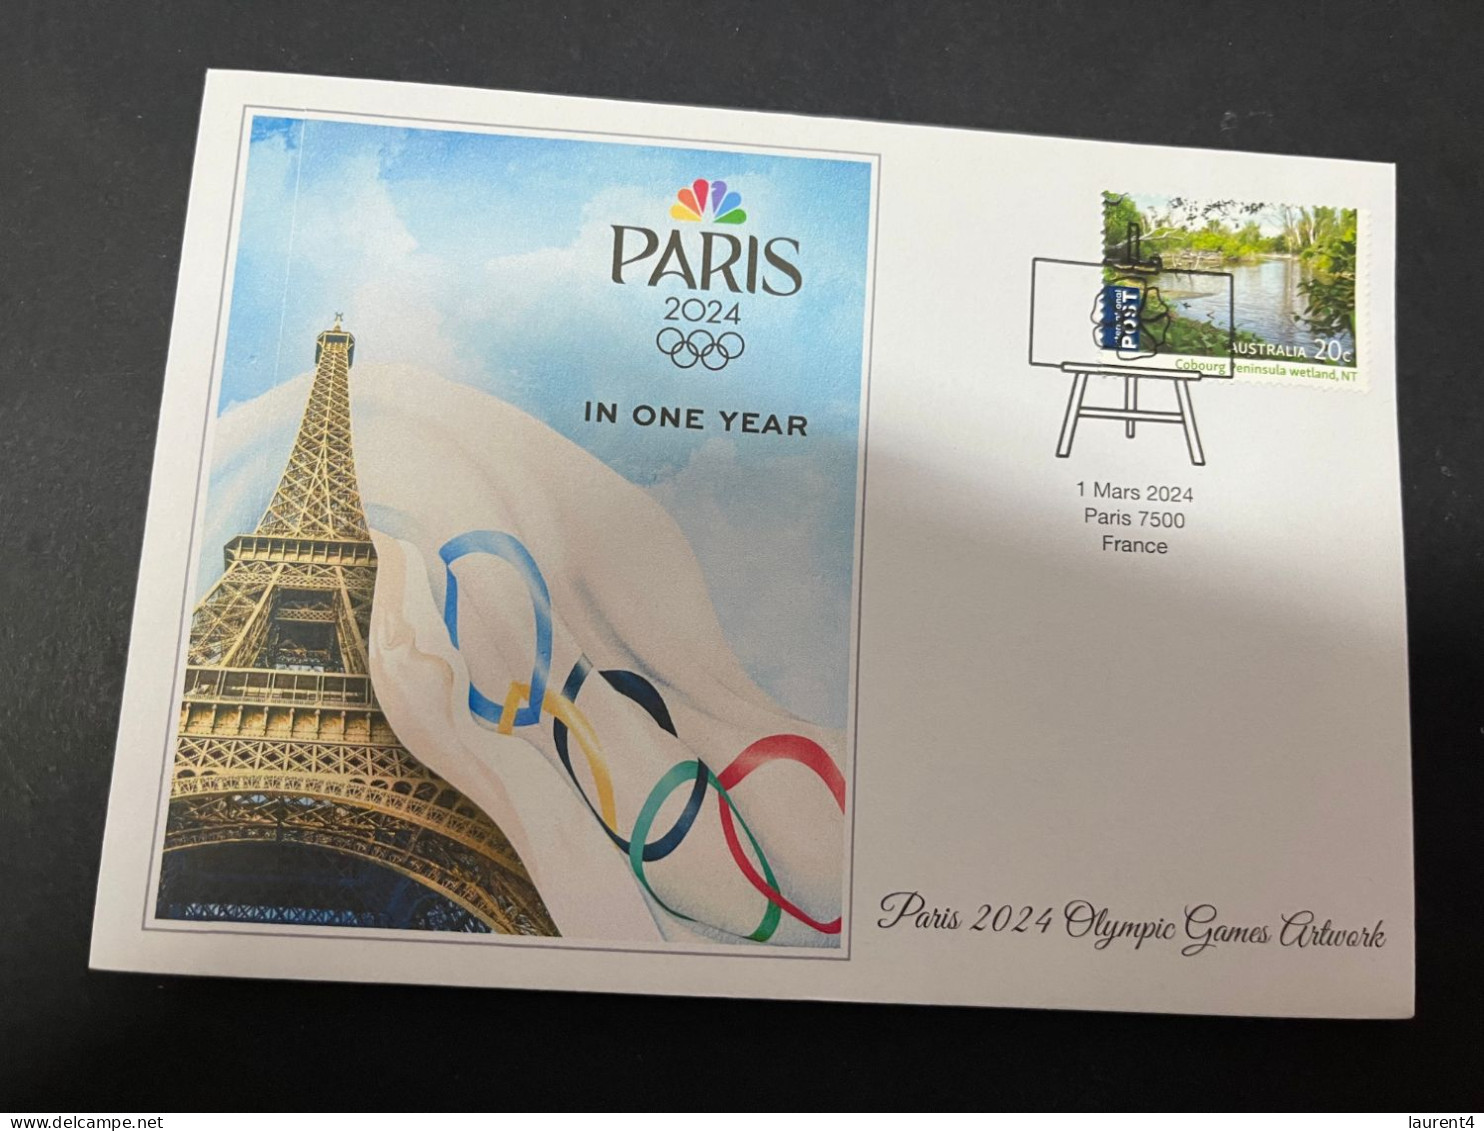 10-3-2024 (2 Y 37) Paris Olympic Games 2024 - 6 (of 12 Covers Series) For The Paris 2024 Olympic Games Artwork - Eté 2024 : Paris